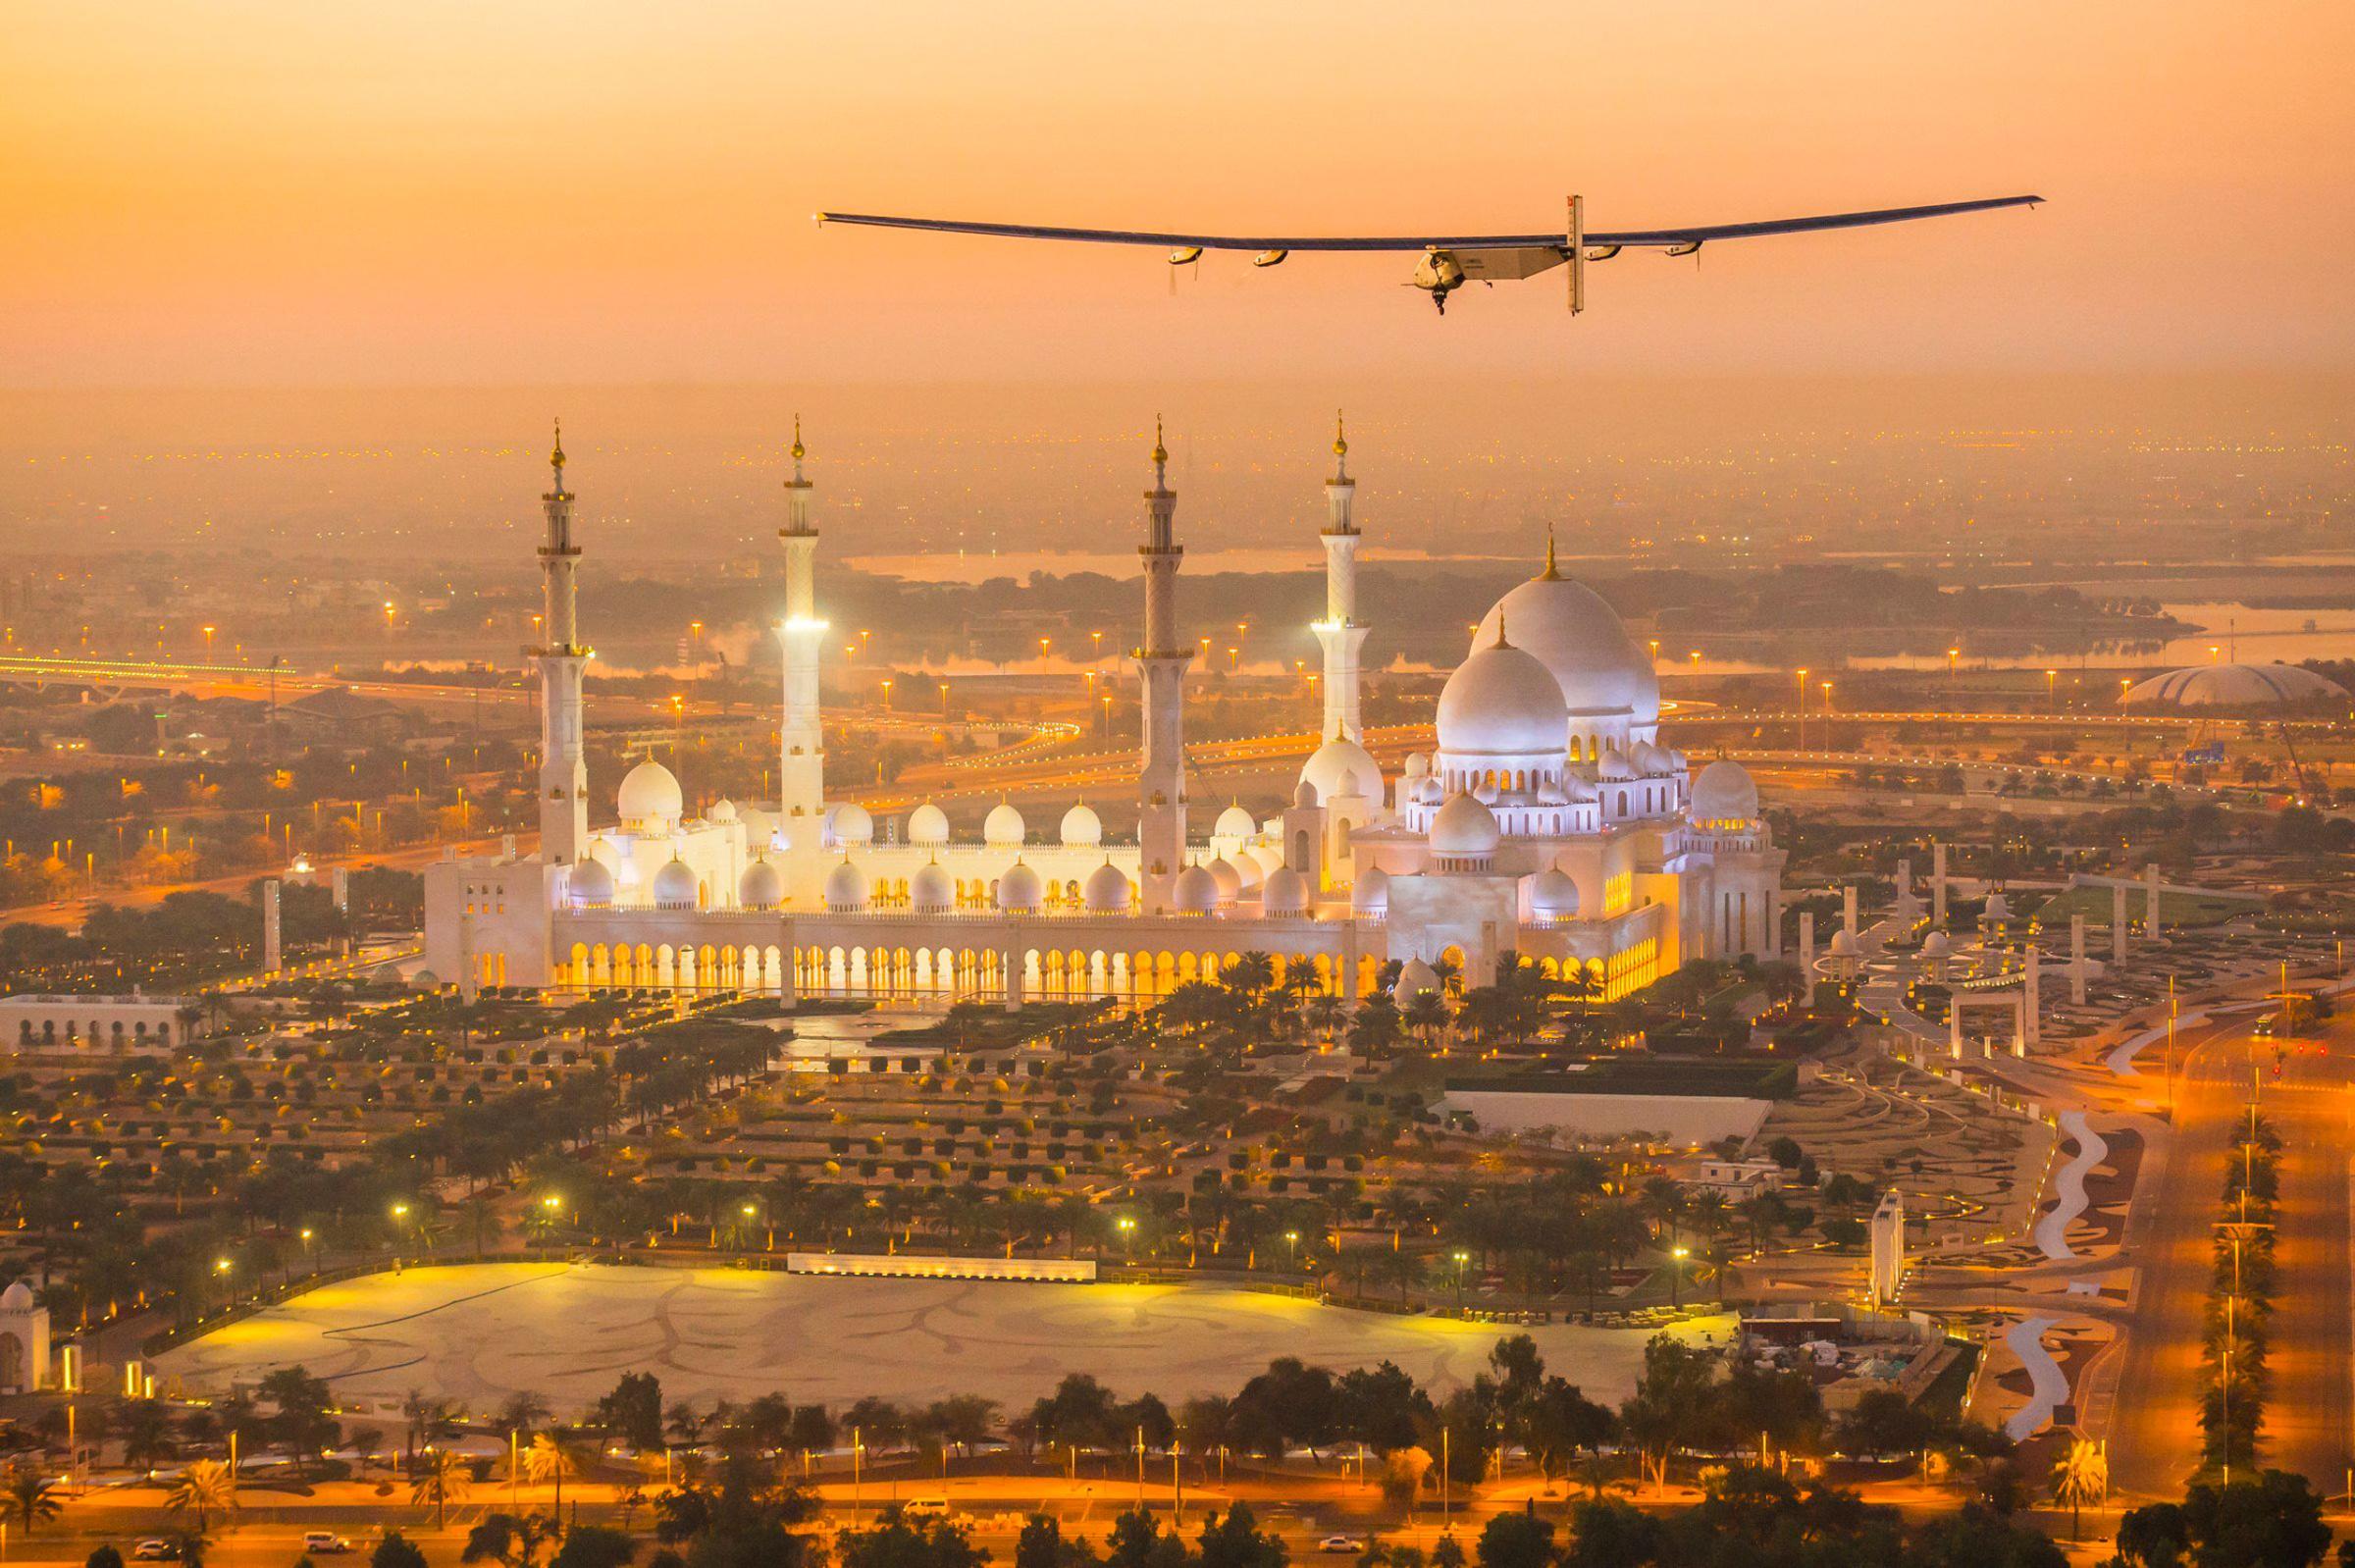 The Solar Impulse 2, a solar-powered plane, flies over the Sheikh Zayed Grand Mosque in Abu Dhabi during preparations for next month's round-the-world flight on Feb. 26, 2015.